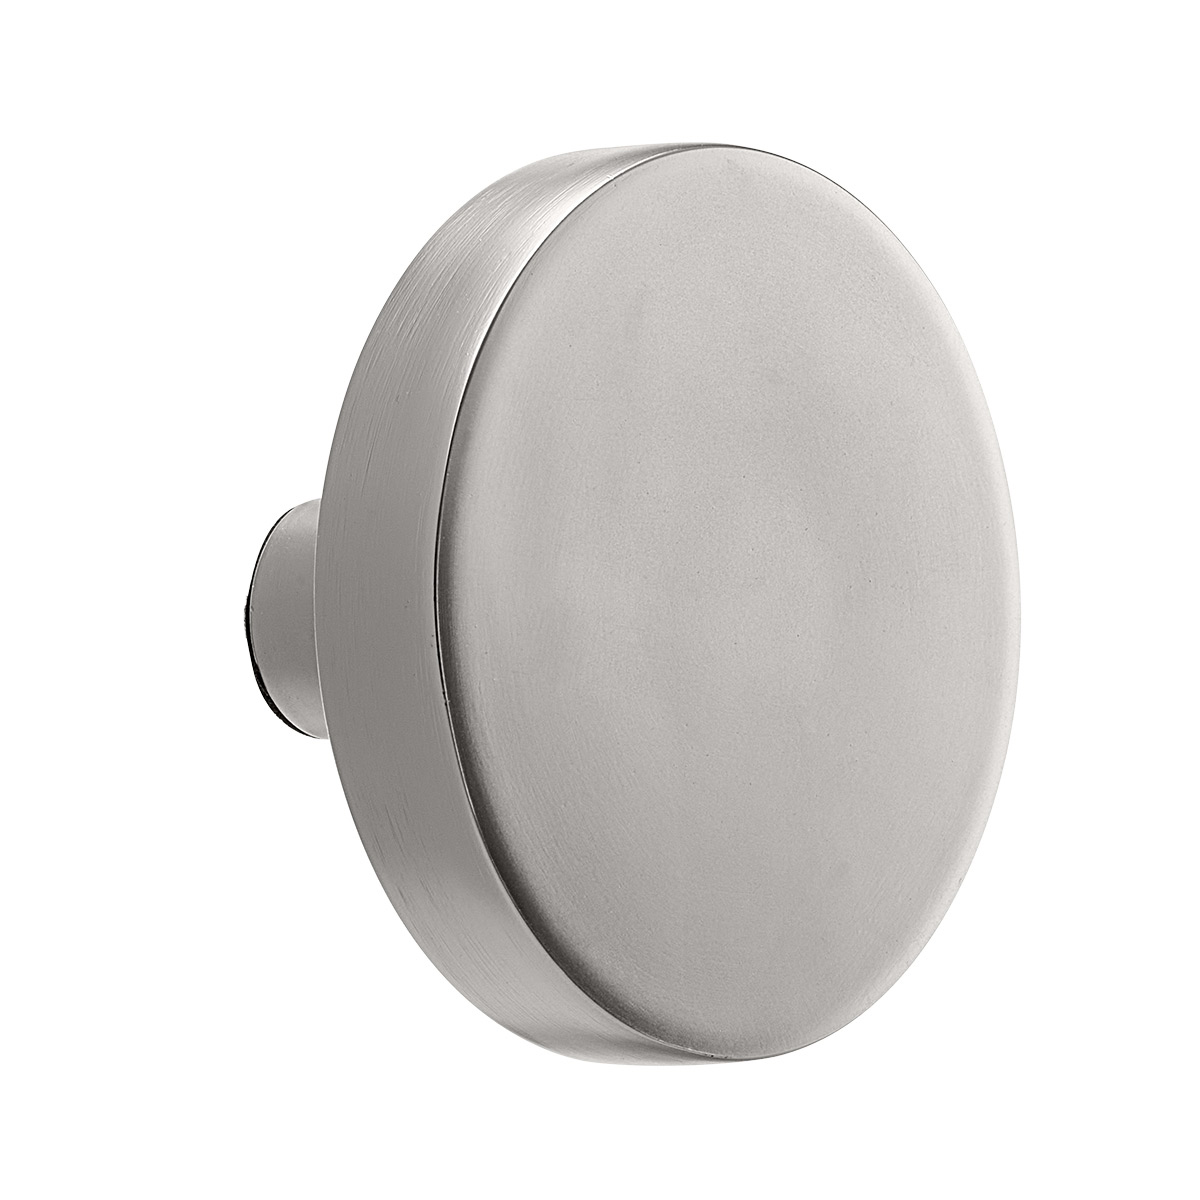 The Container Store Decorative Round Wall Hook | The Container Store